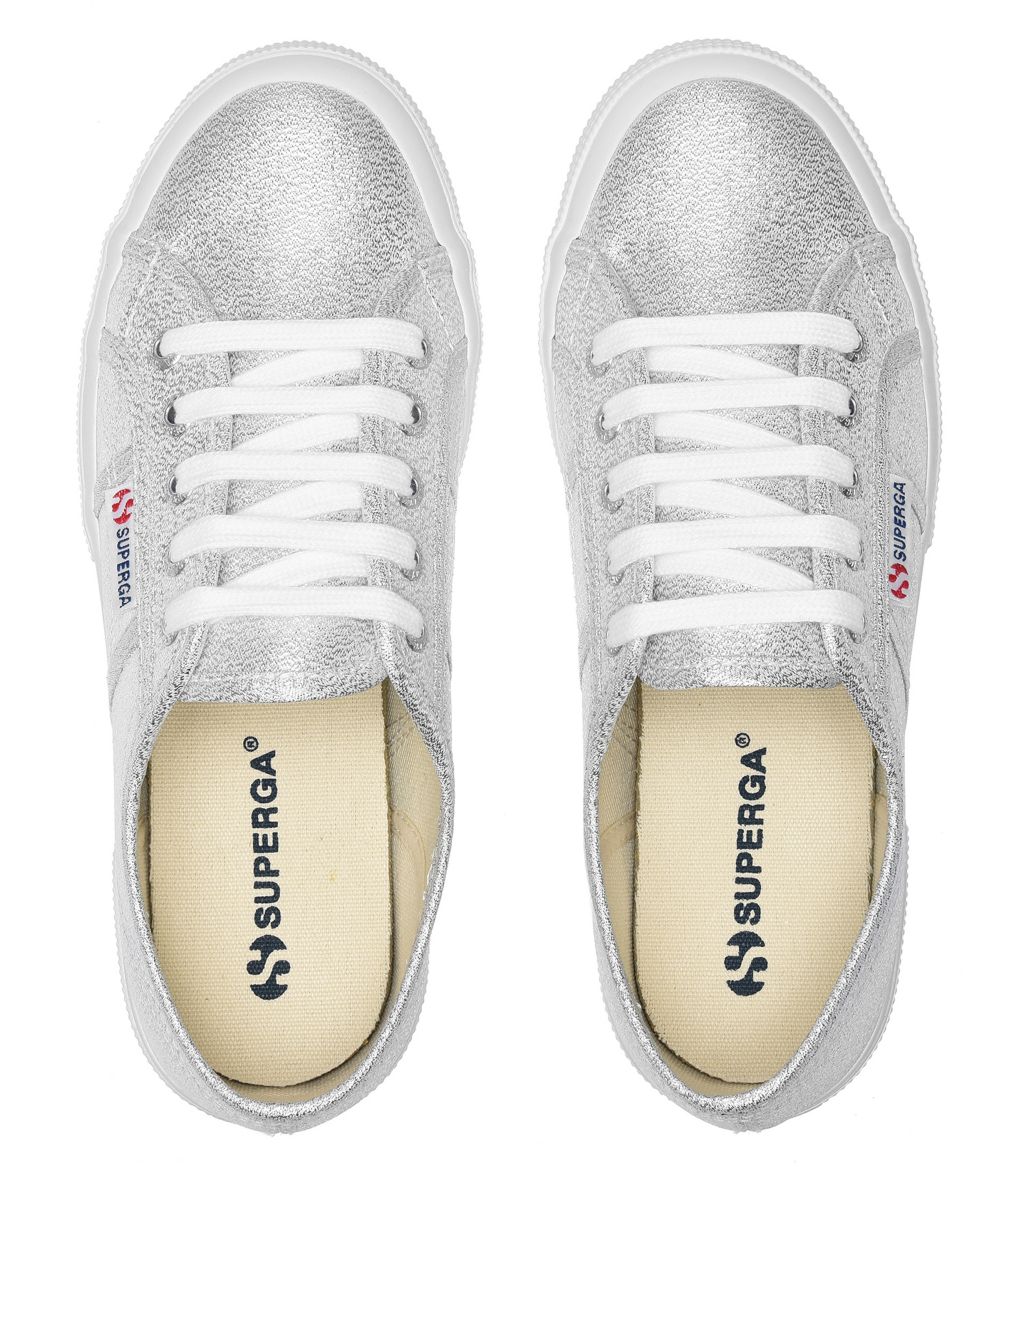 Canvas Lace Up Glitter Trainers image 2